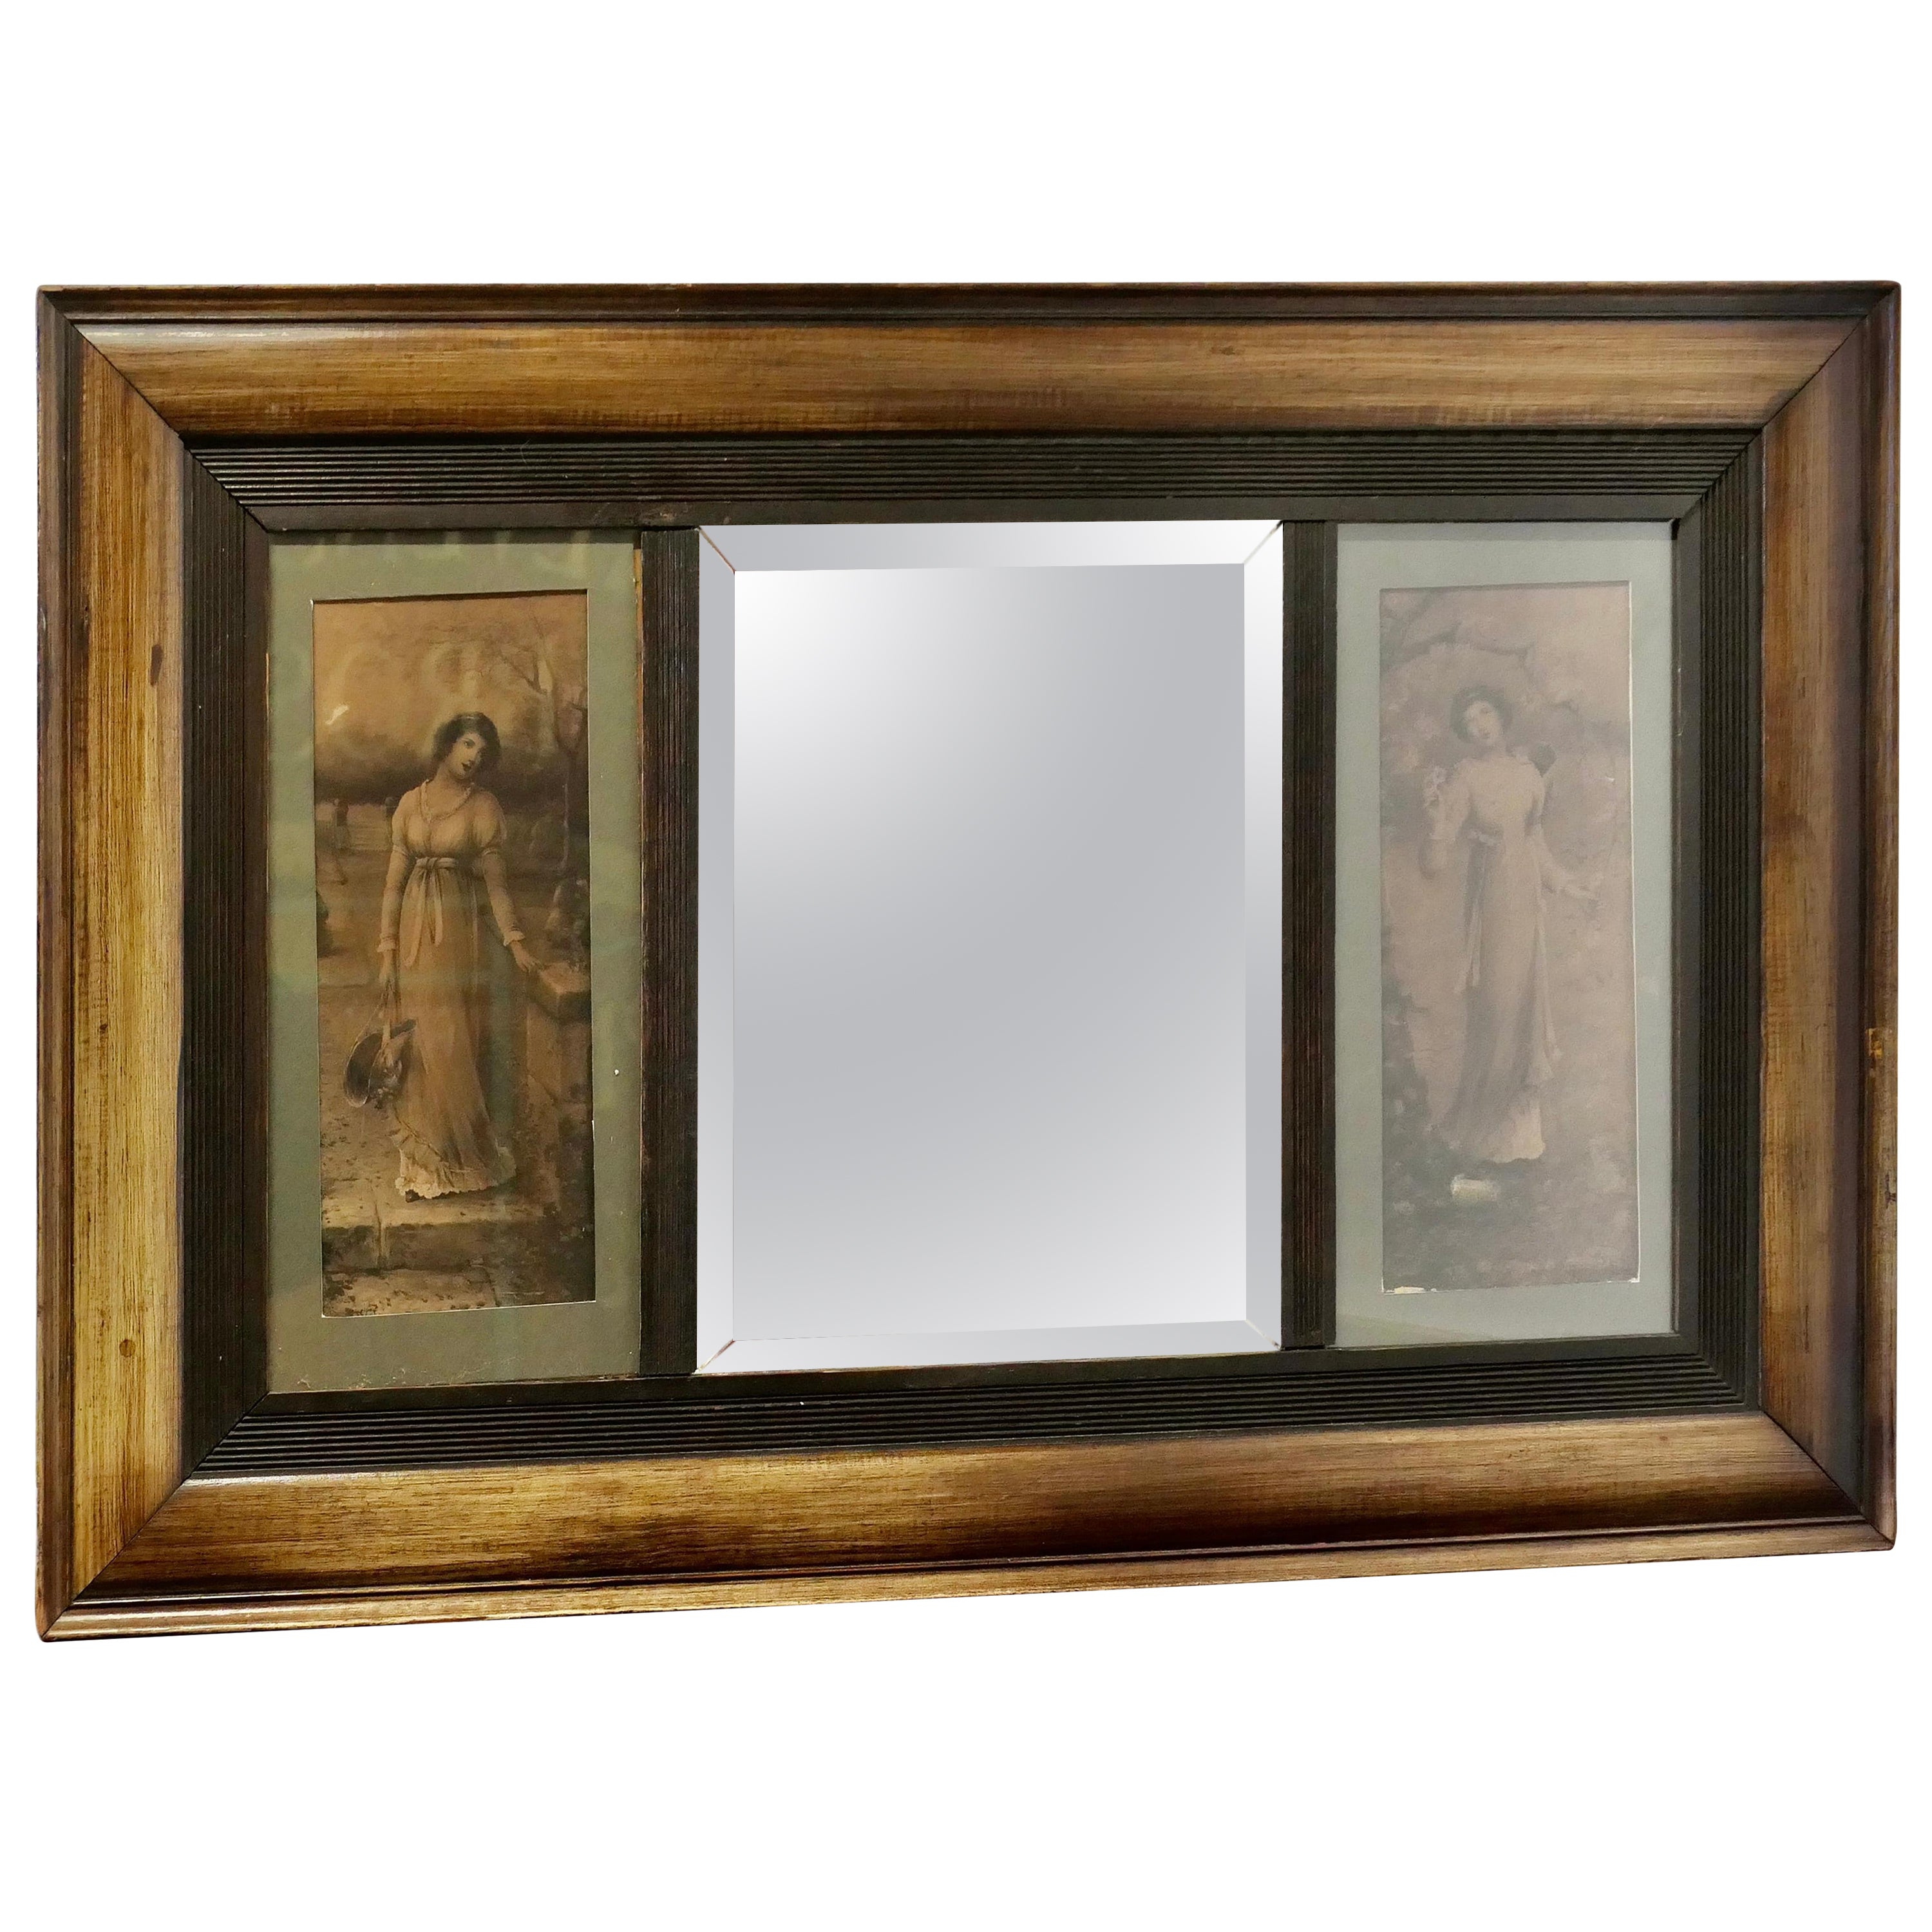 Edwardian Wall Mirror with Prints  This is a lovely decorative piece 